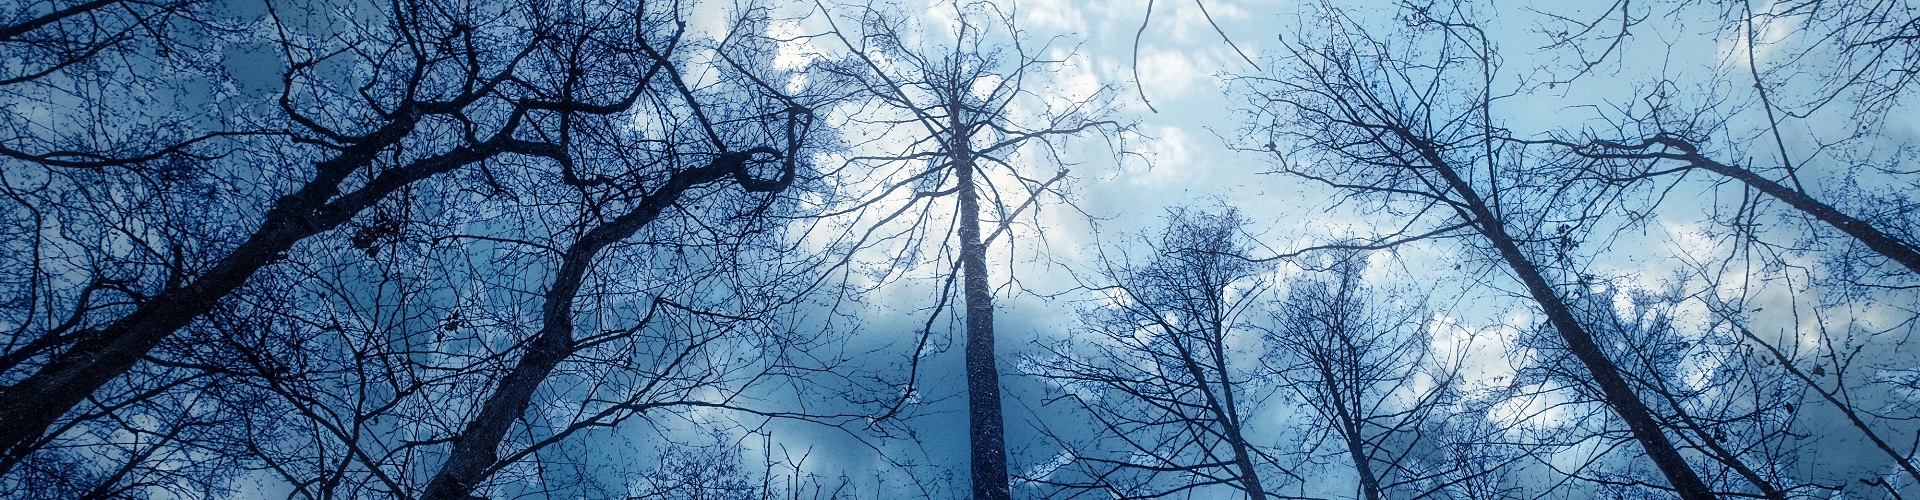 Looking up at icy treetops against sky